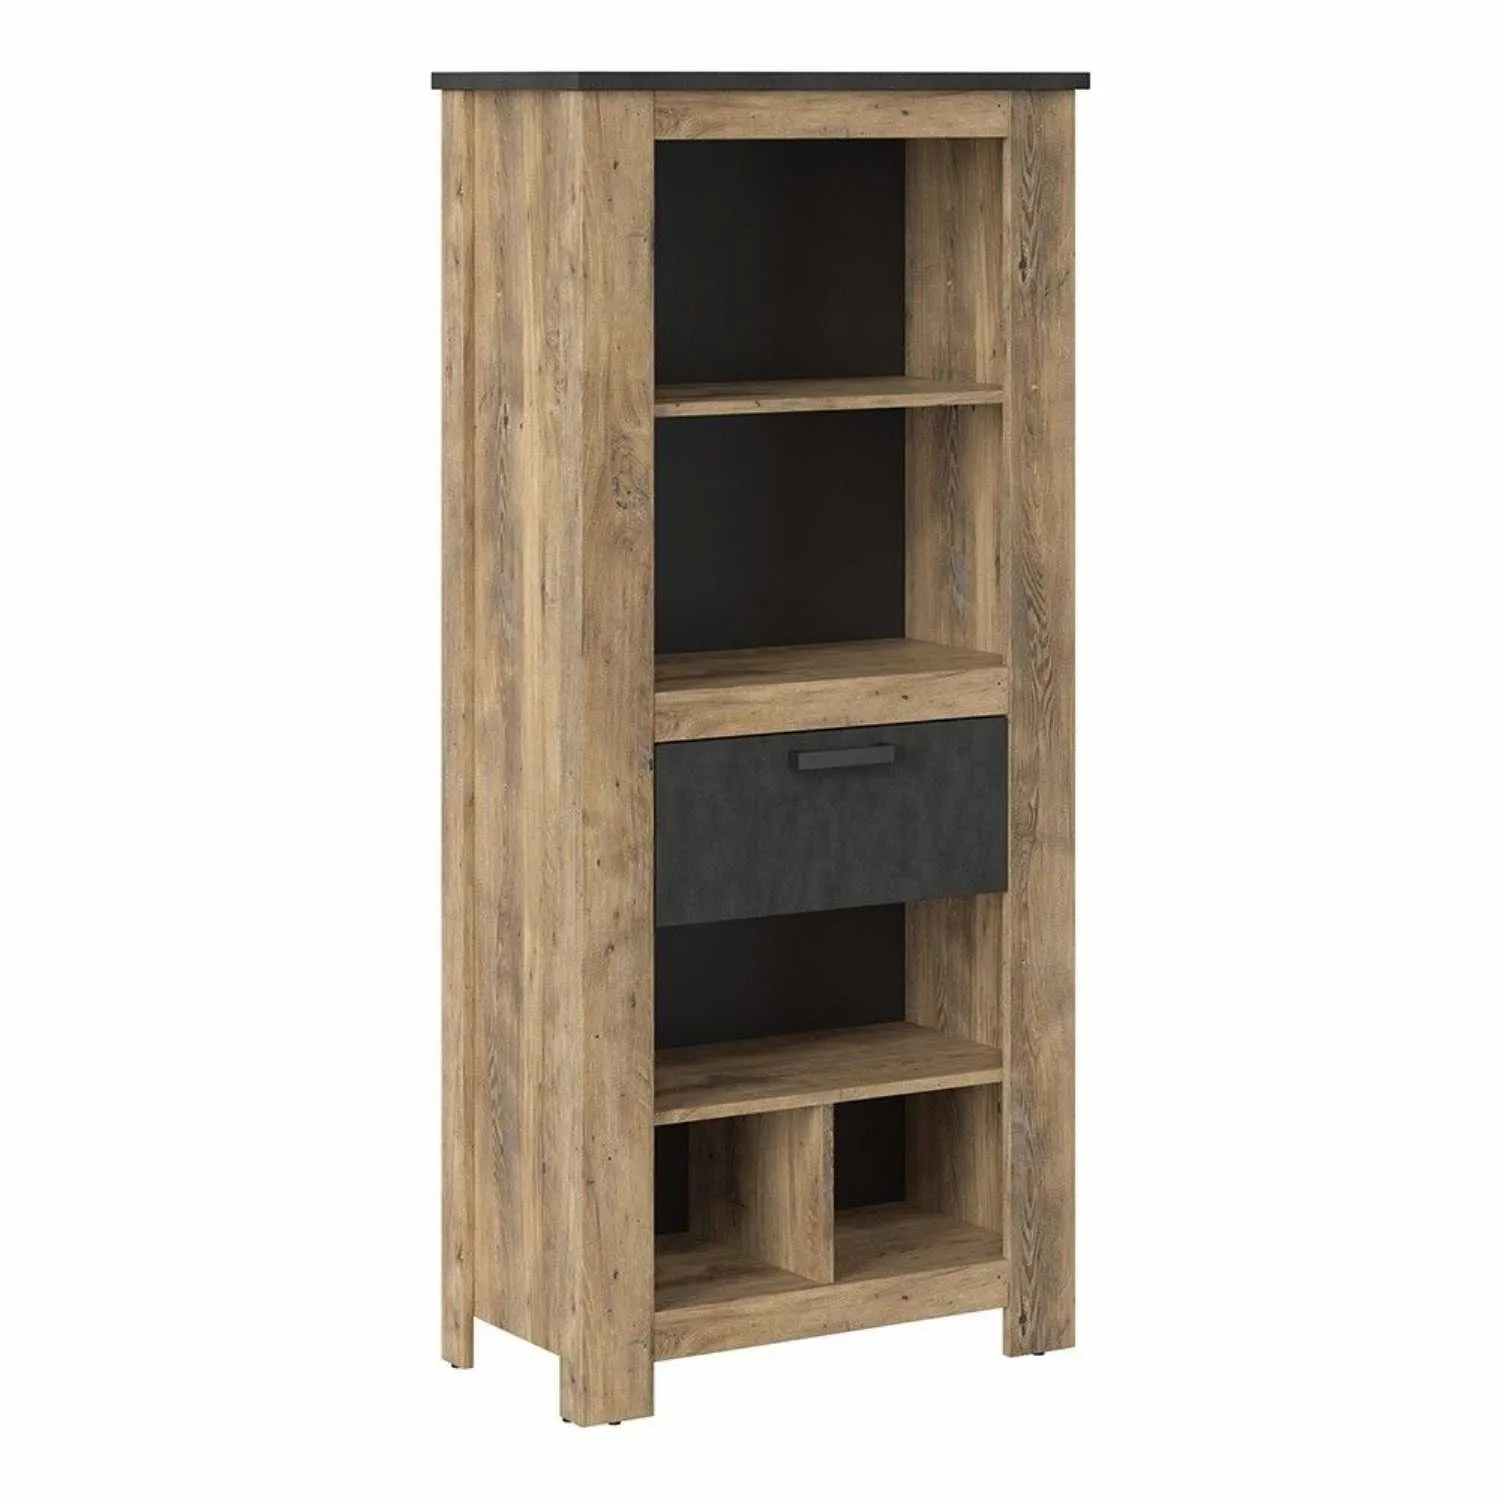 1 drawer bookcase in Chestnut and Matera Grey